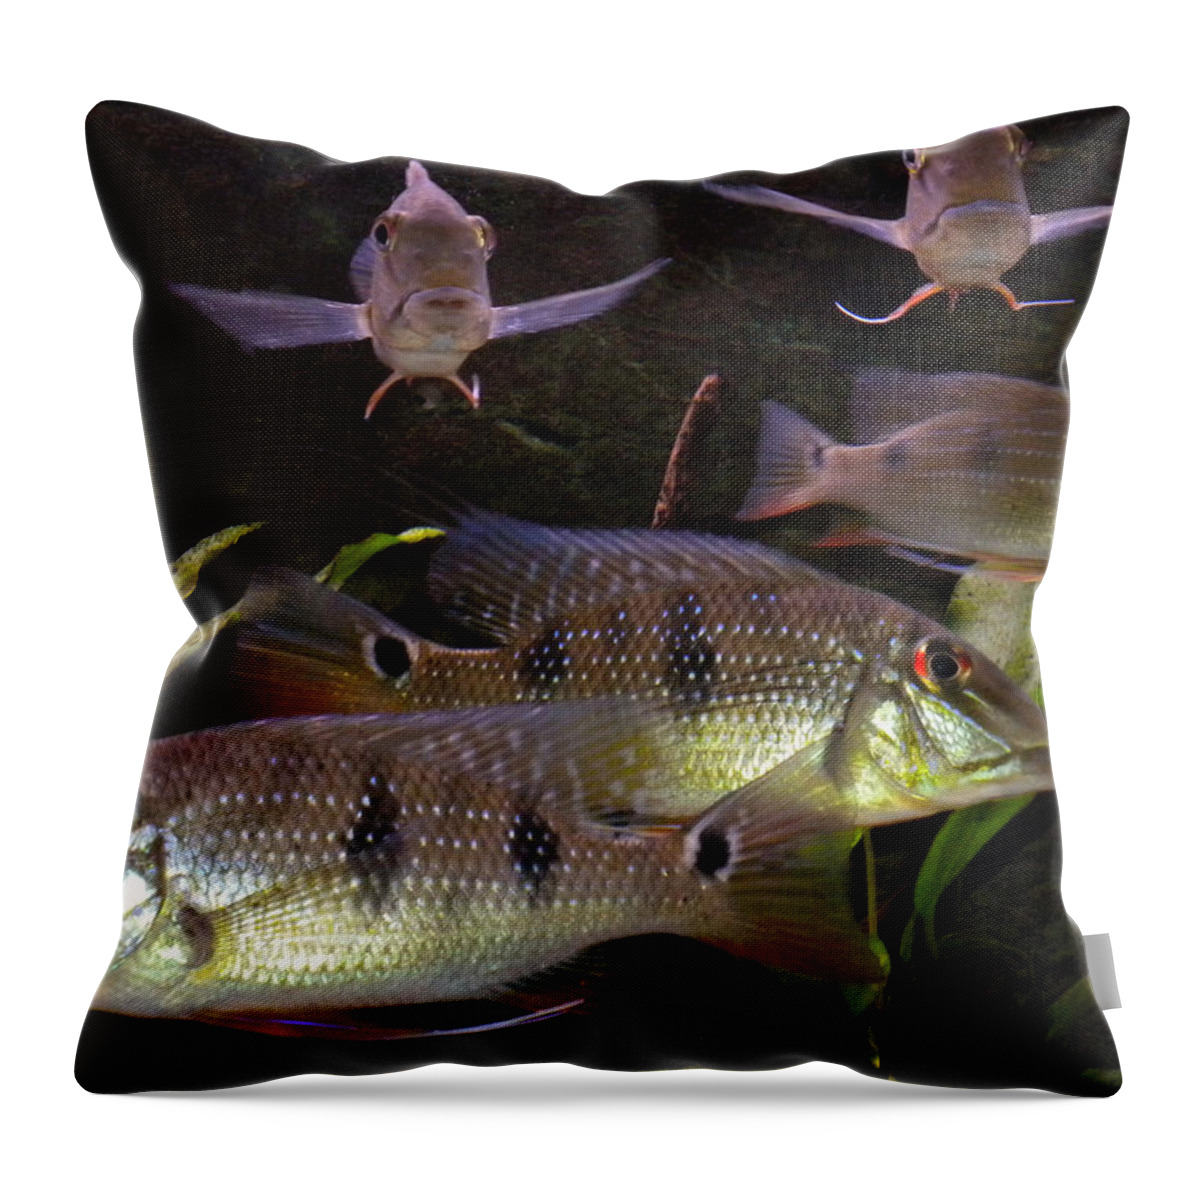 Colette Throw Pillow featuring the photograph Fish by Colette V Hera Guggenheim